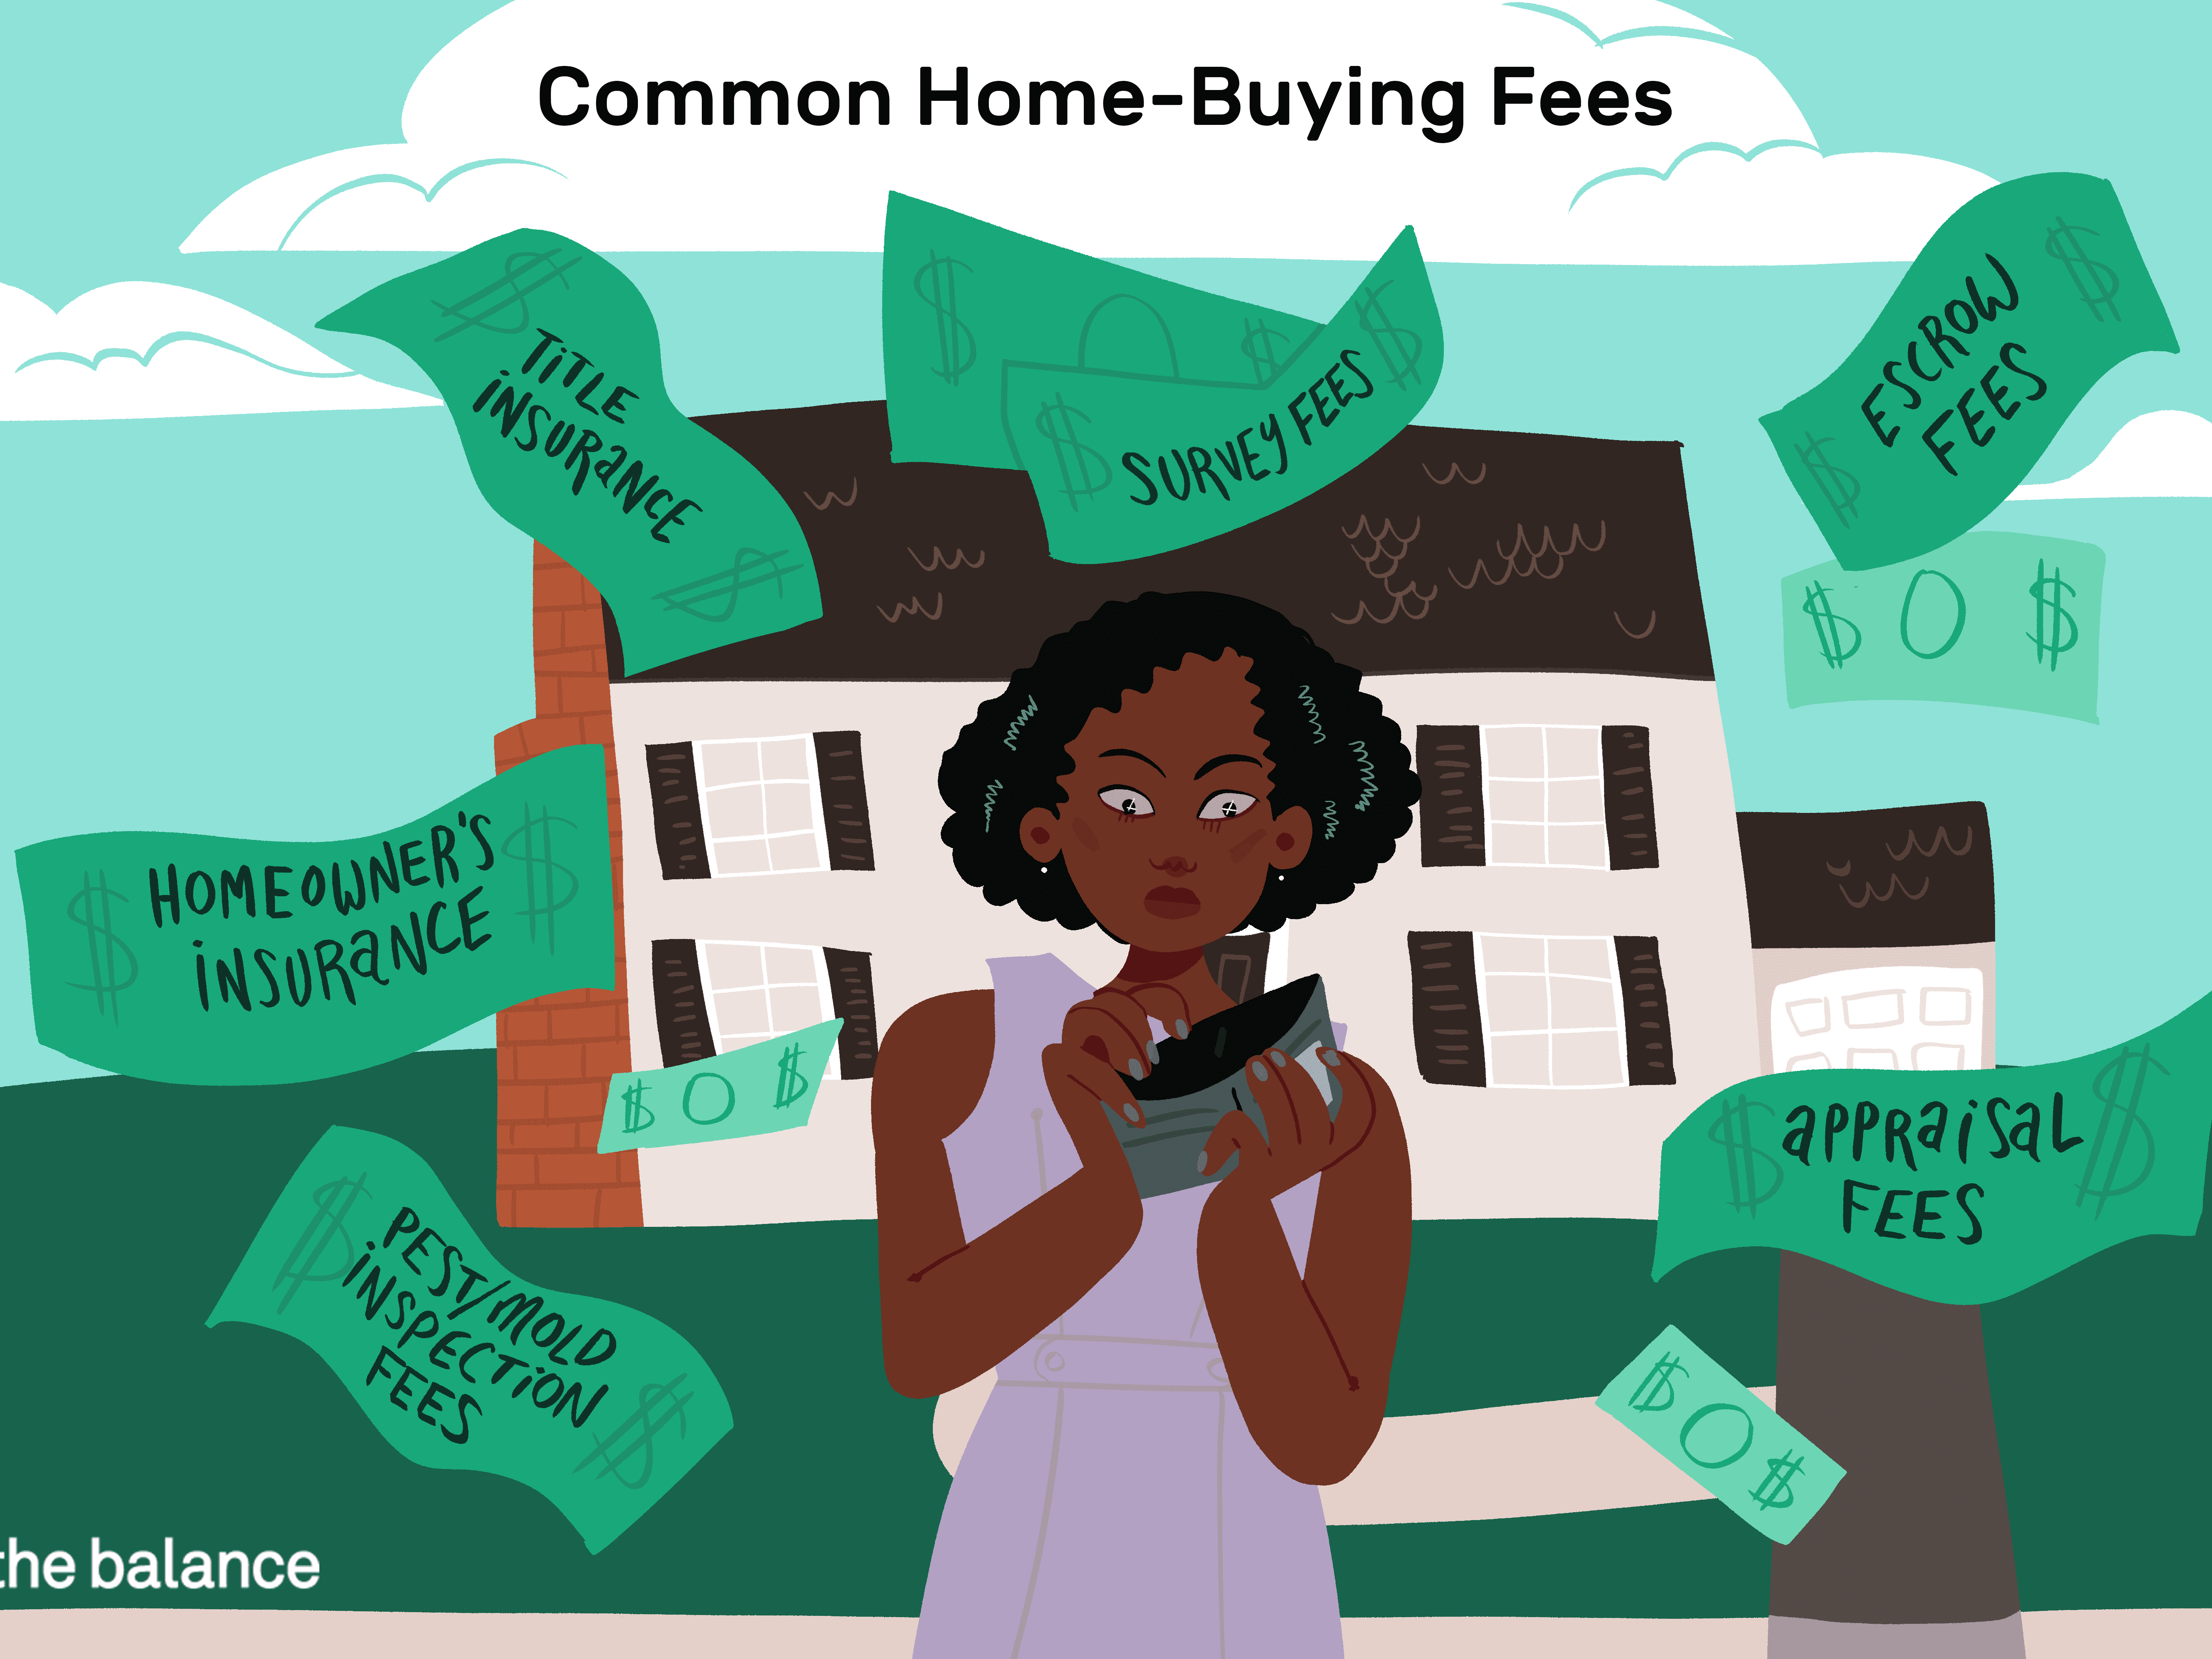 Mortgage Broker Fee Agreement Fees You Need To Know About Before Buying A Home